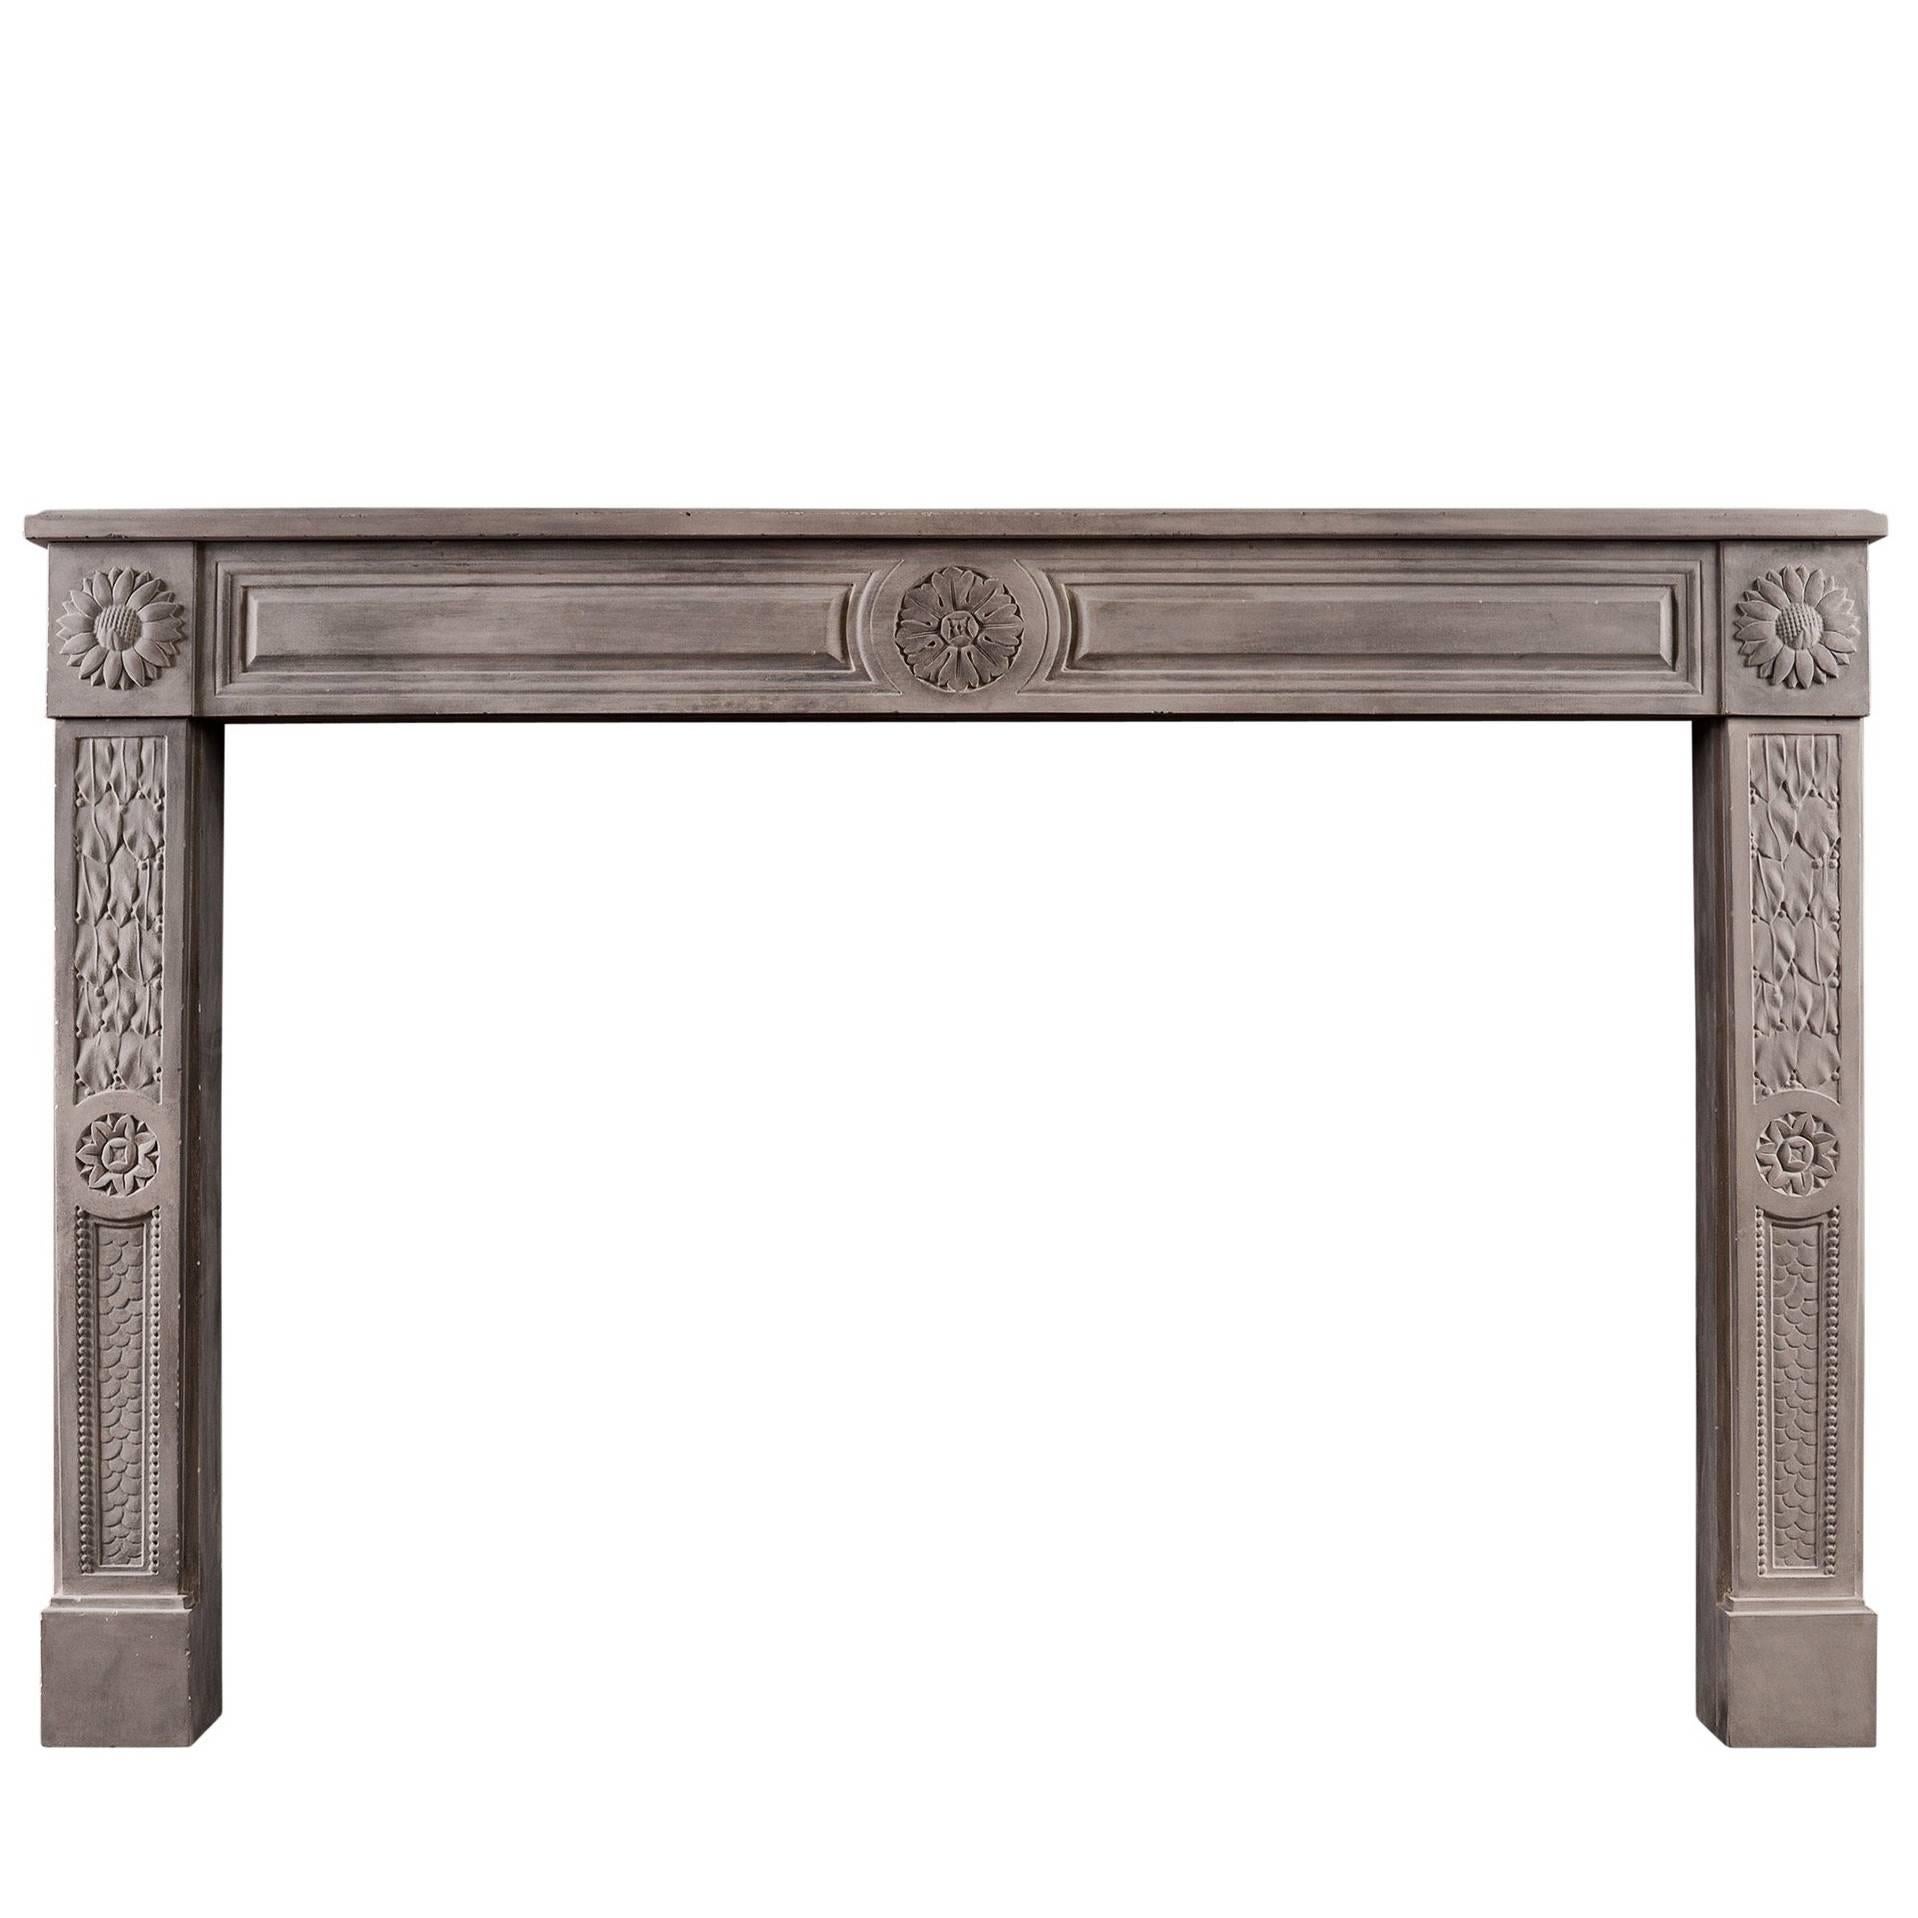 Rustic Louis XVI Style Limestone Fireplace For Sale